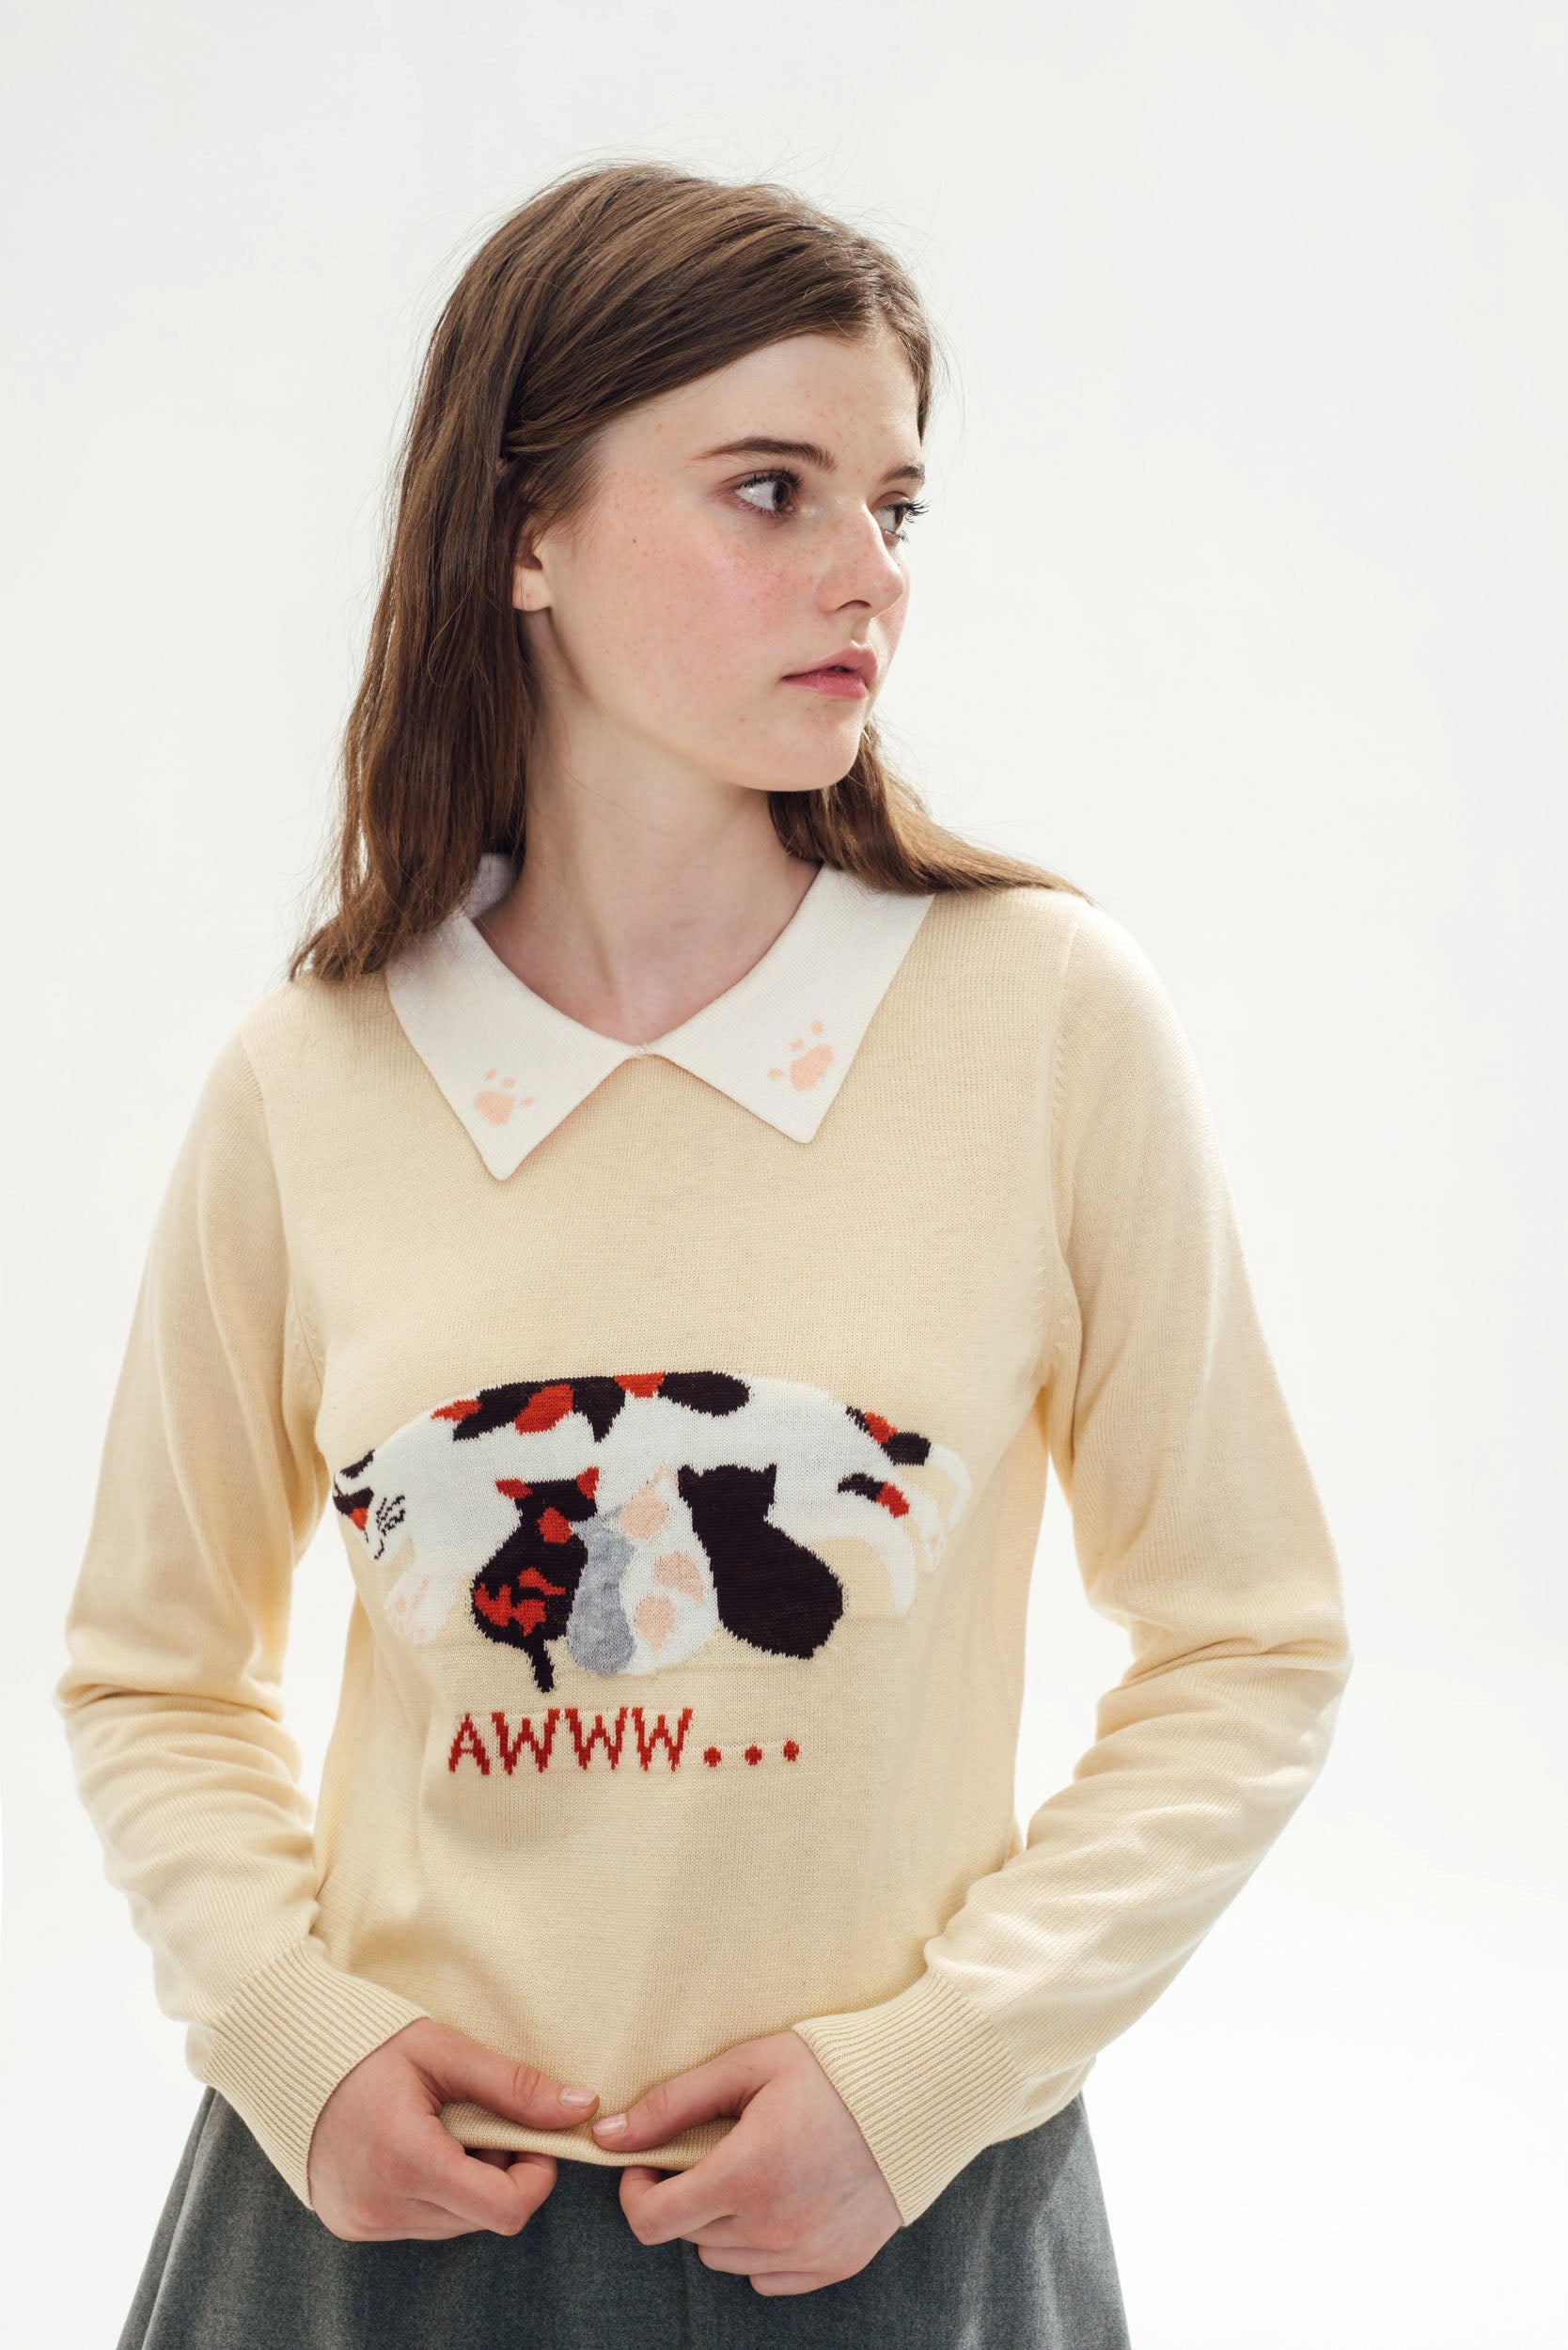 Paws for Thought Jumper (Cream)